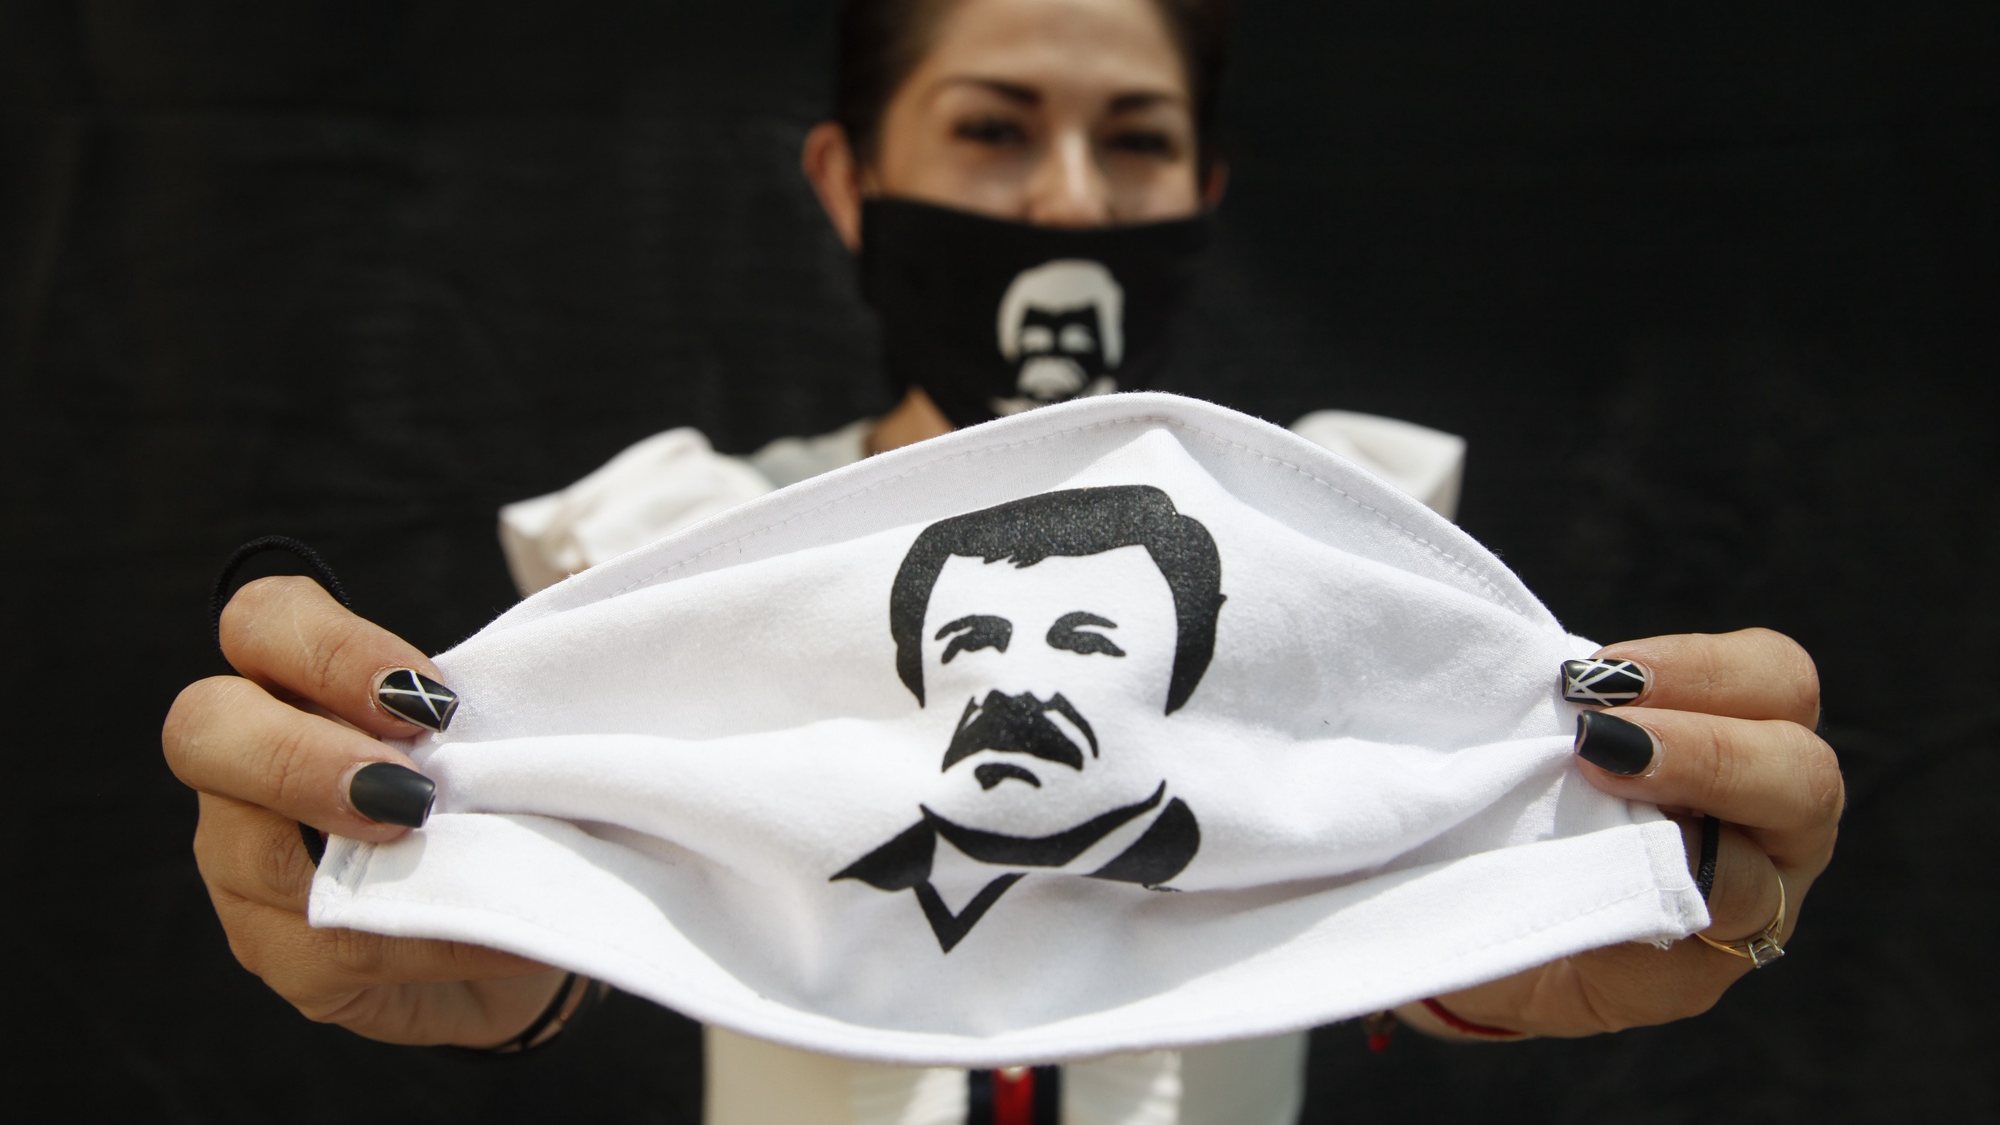 epa08367814 A person holds a face mask, which depicts famed drug lord Joaquin &#039;El Chapo&#039; Guzmanto, in Guadalajara, Jalisco, Mexico, 16 April 2020. According to media reports, Alejandrina Guzman, daughter of Joaquin &#039;El Chapo&#039; Guzman, has helped in the distribution of aid and supplies, labelled with the name and image of her father, to members of the public during the outbreak of coronavirus in Mexico.  EPA/Francisco Guasco